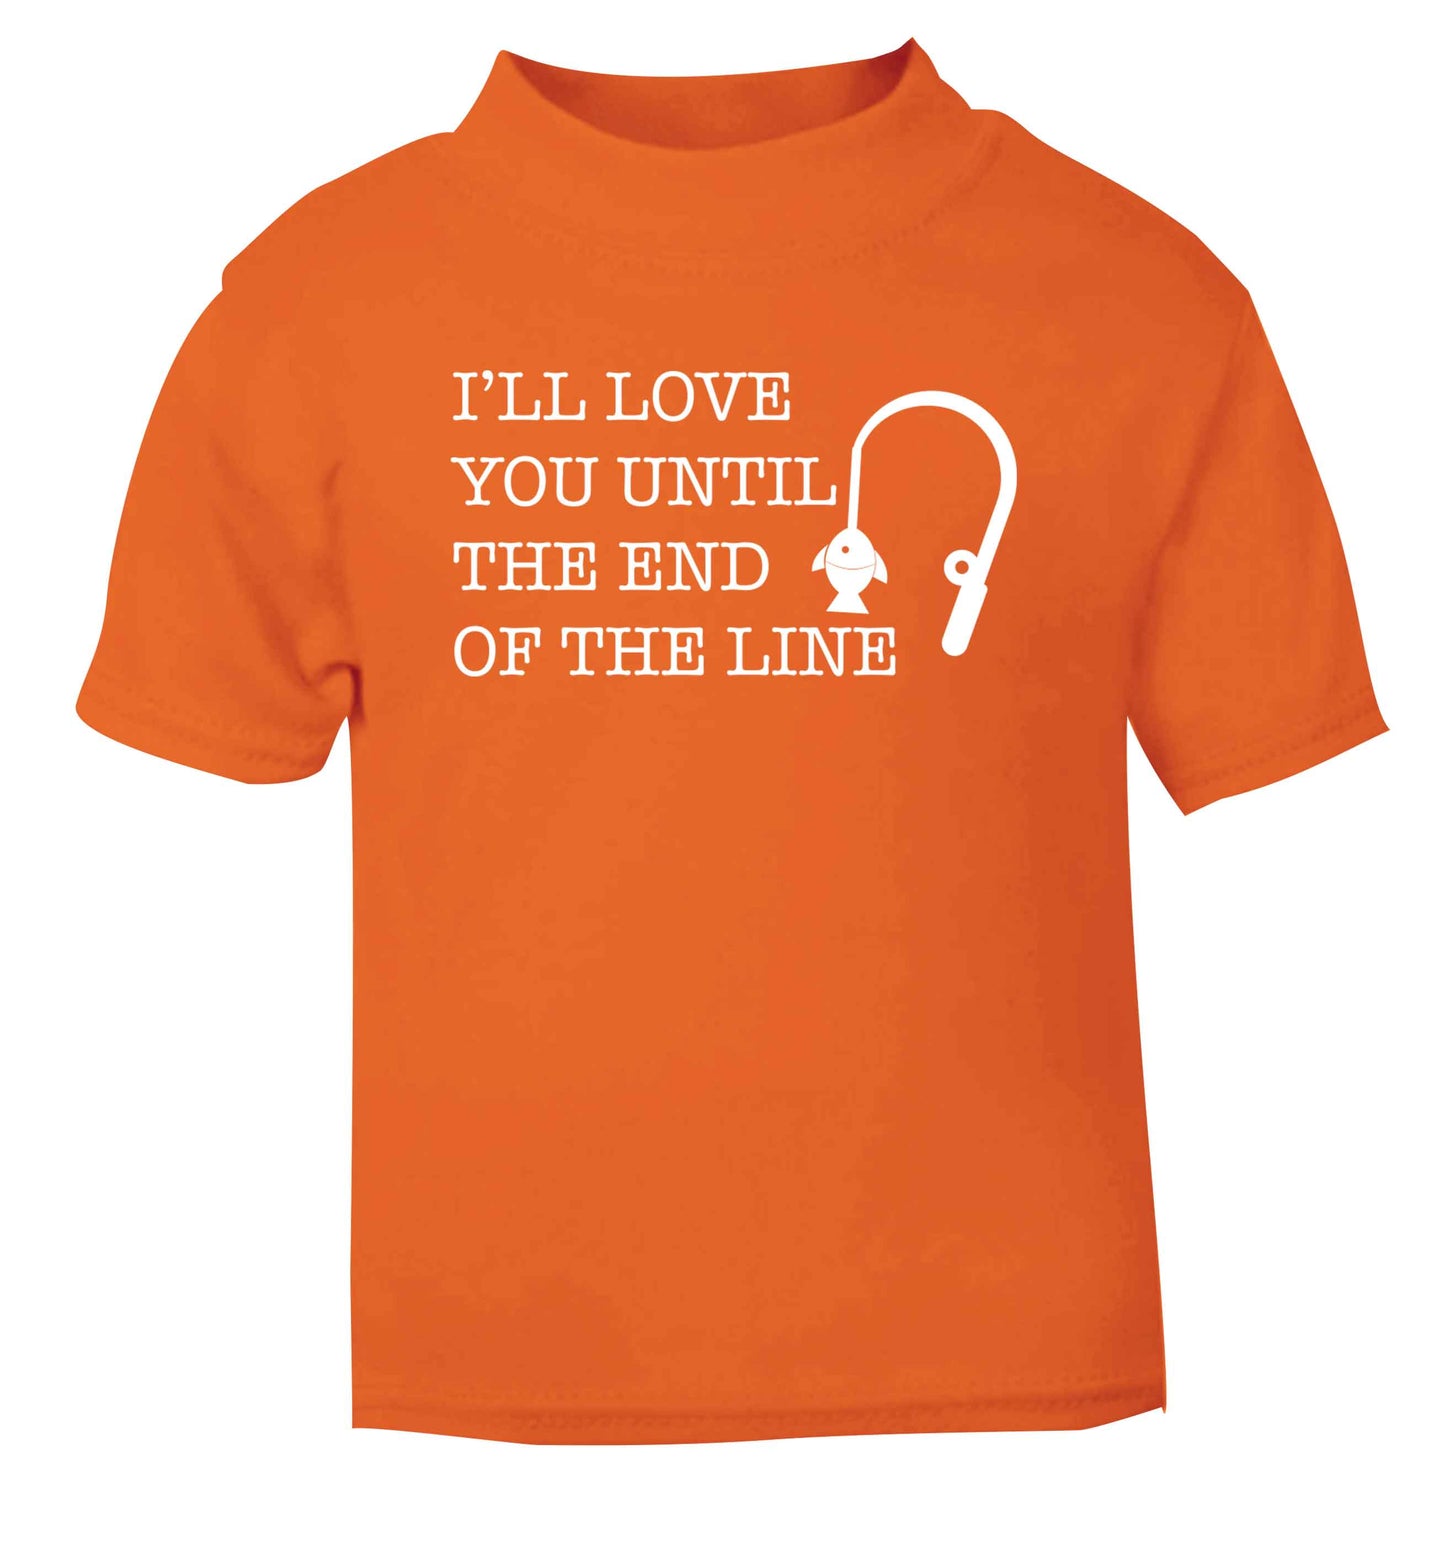 I'll love you until the end of the line orange Baby Toddler Tshirt 2 Years